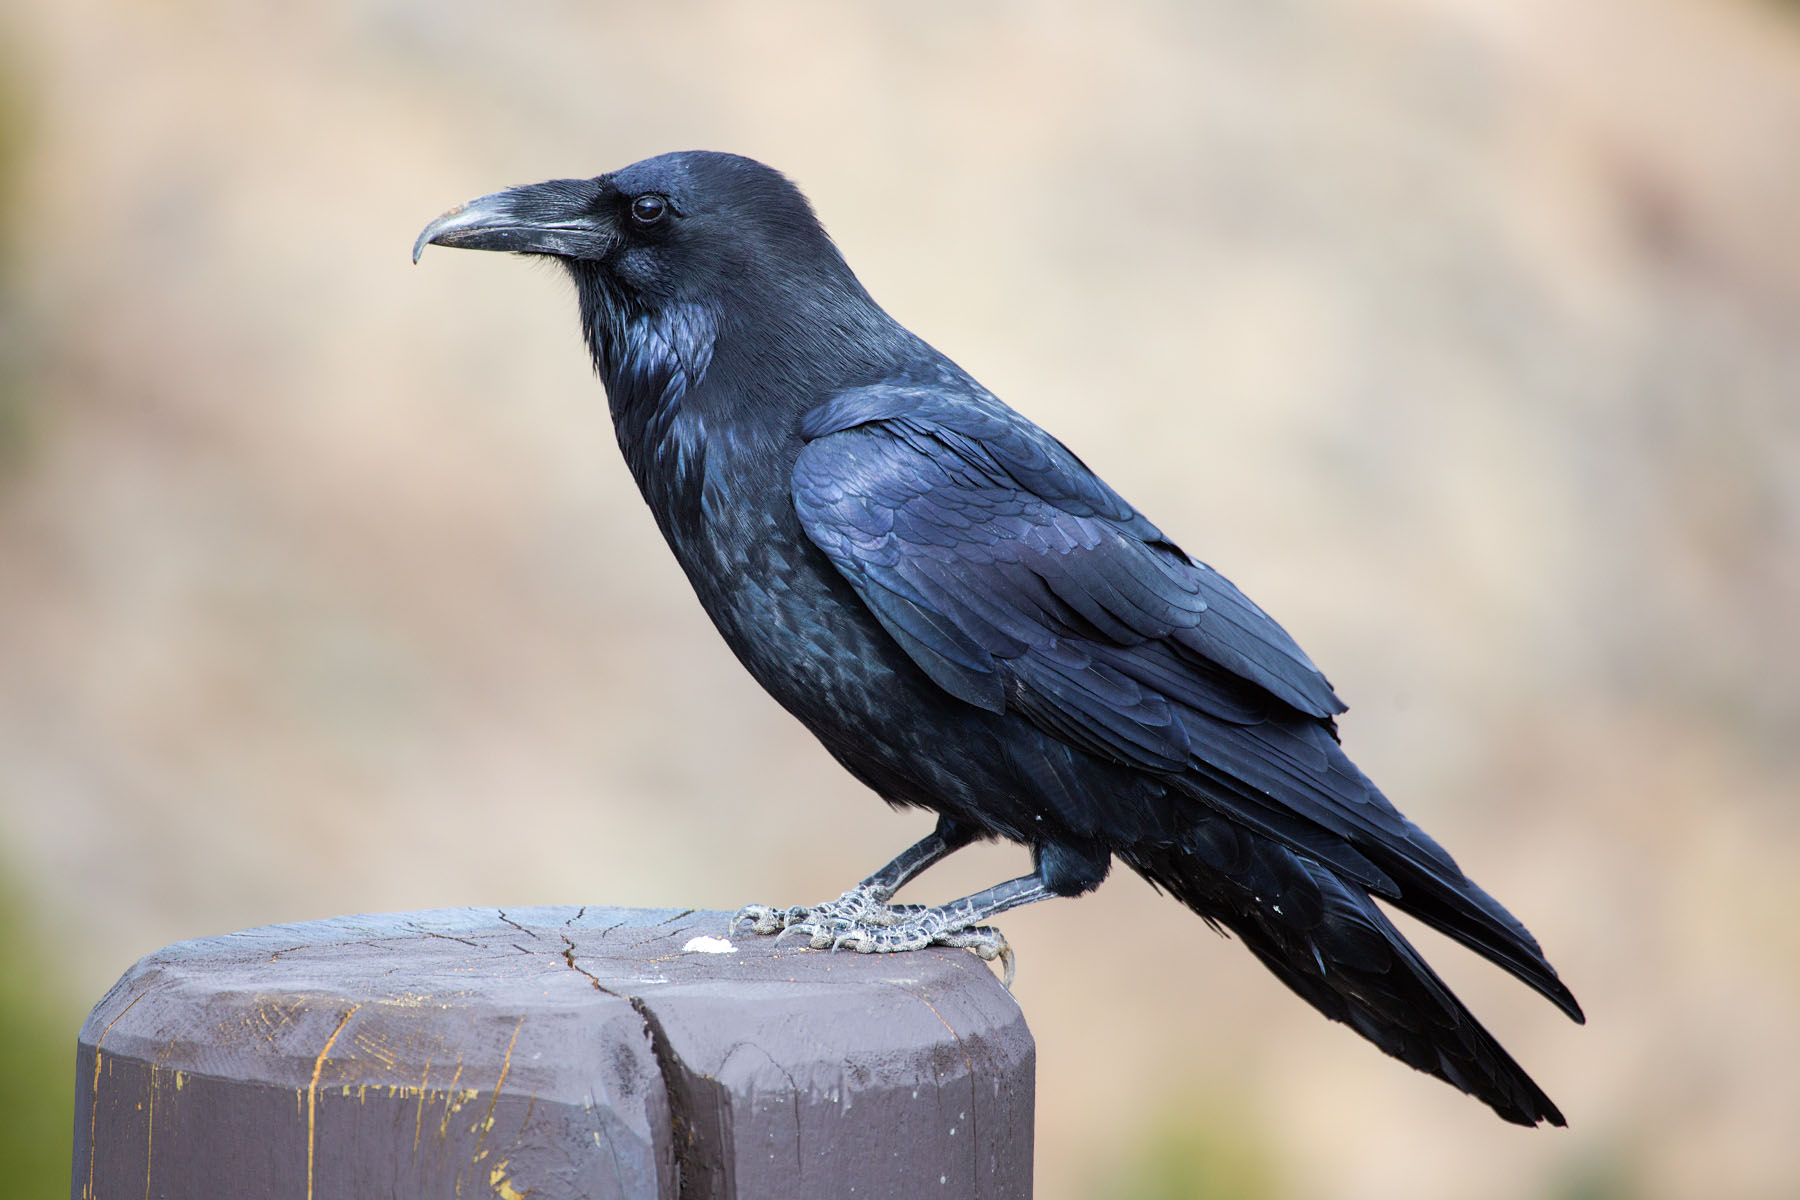 Didnt get a lot of wildlife images from this trip to Yellowstone, but there are always ravens hanging around.  Click for next photo.